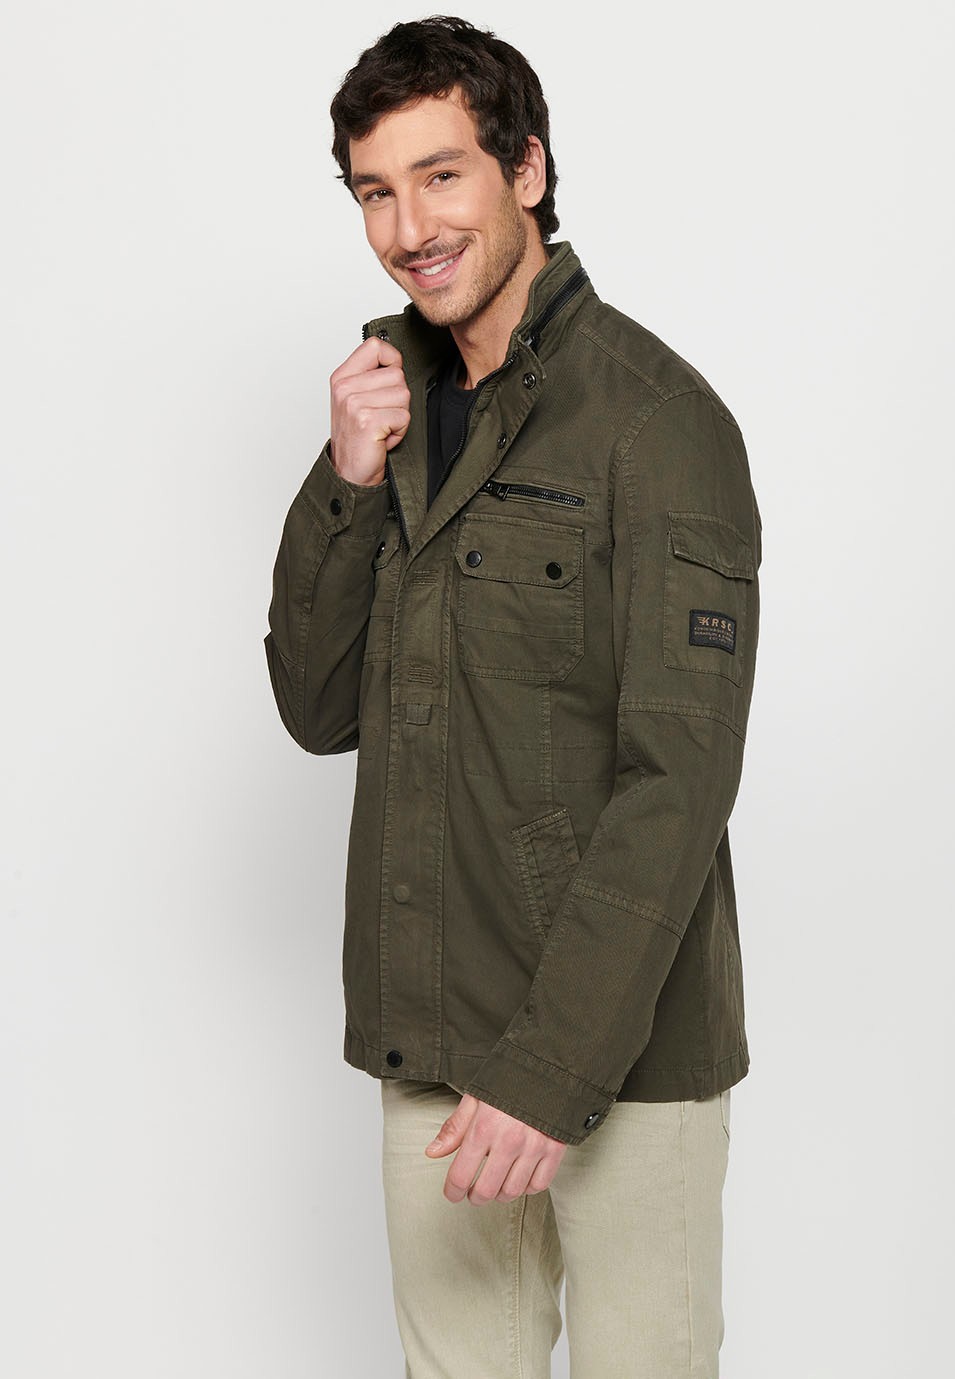 Long Jacket with Zipper Front Closure and Lapel with Stand Collar and Flap Pockets in Olive Color for Men 1